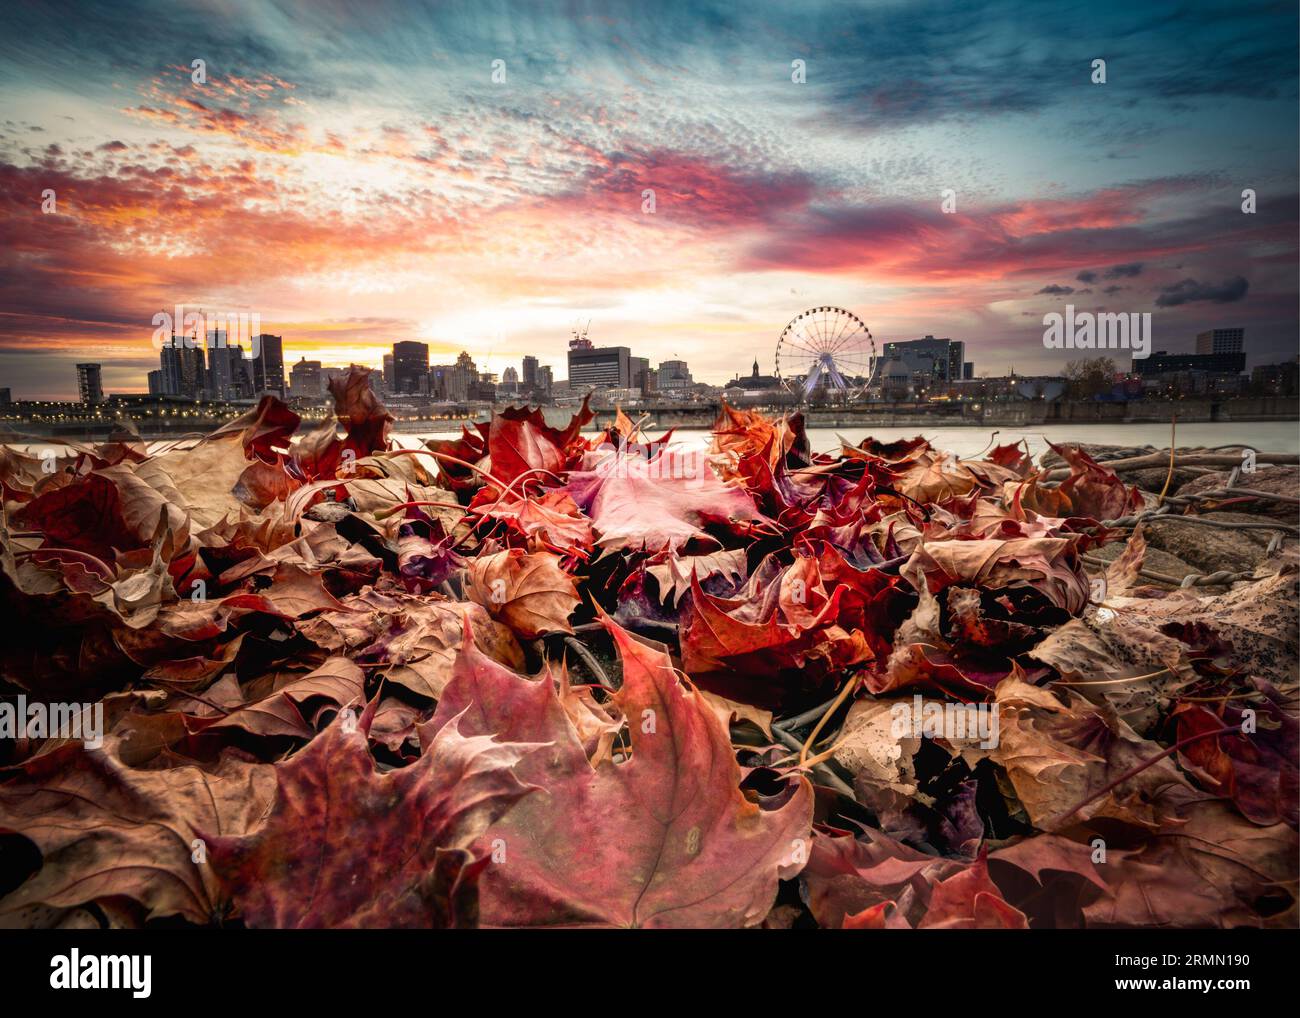 Colorful fallen autumn leaves with the city of Montreal Canada skyline seen in the background Stock Photo